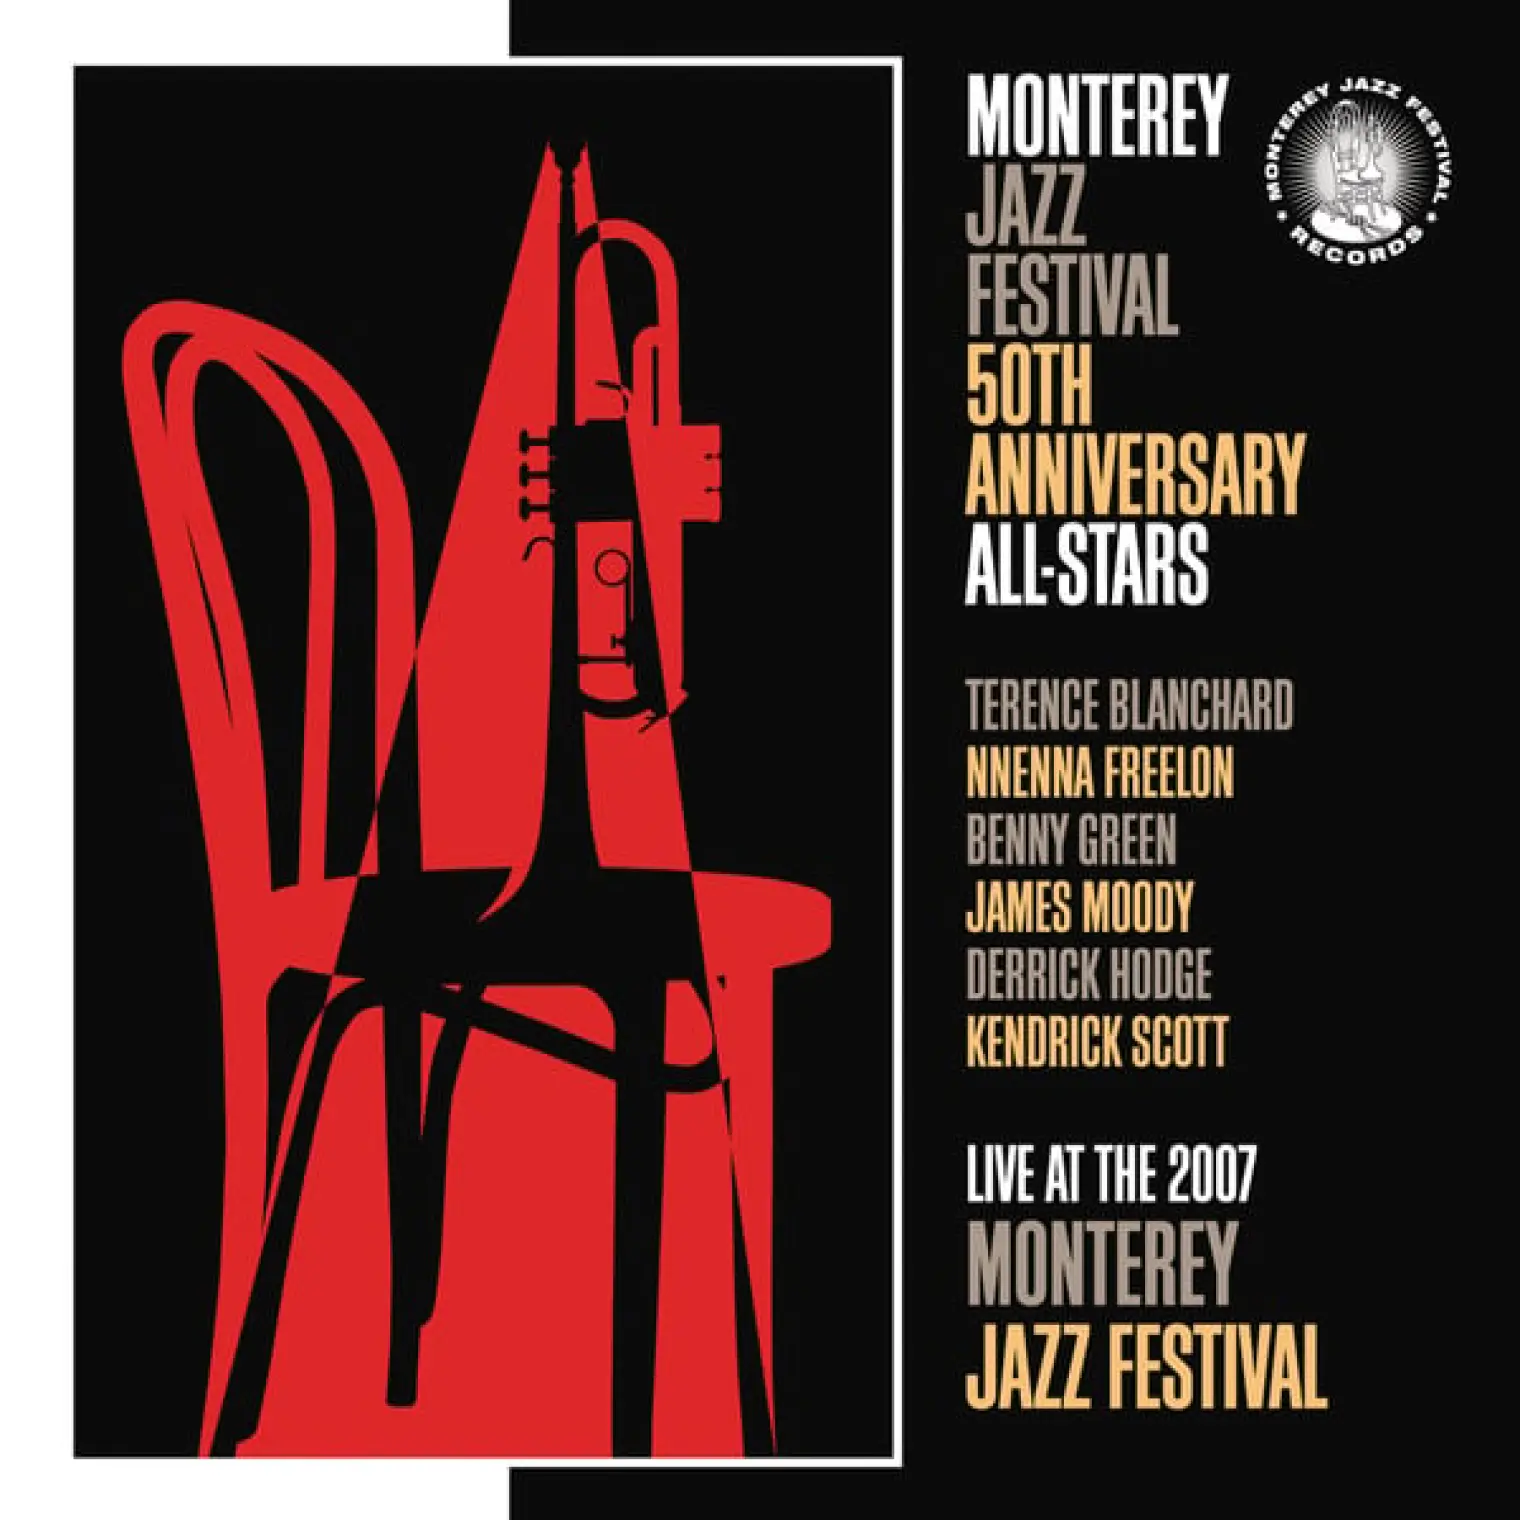 Monterey Jazz Festival 50th Anniversary All-Stars: Live 2007 -  Terence Blanchard 